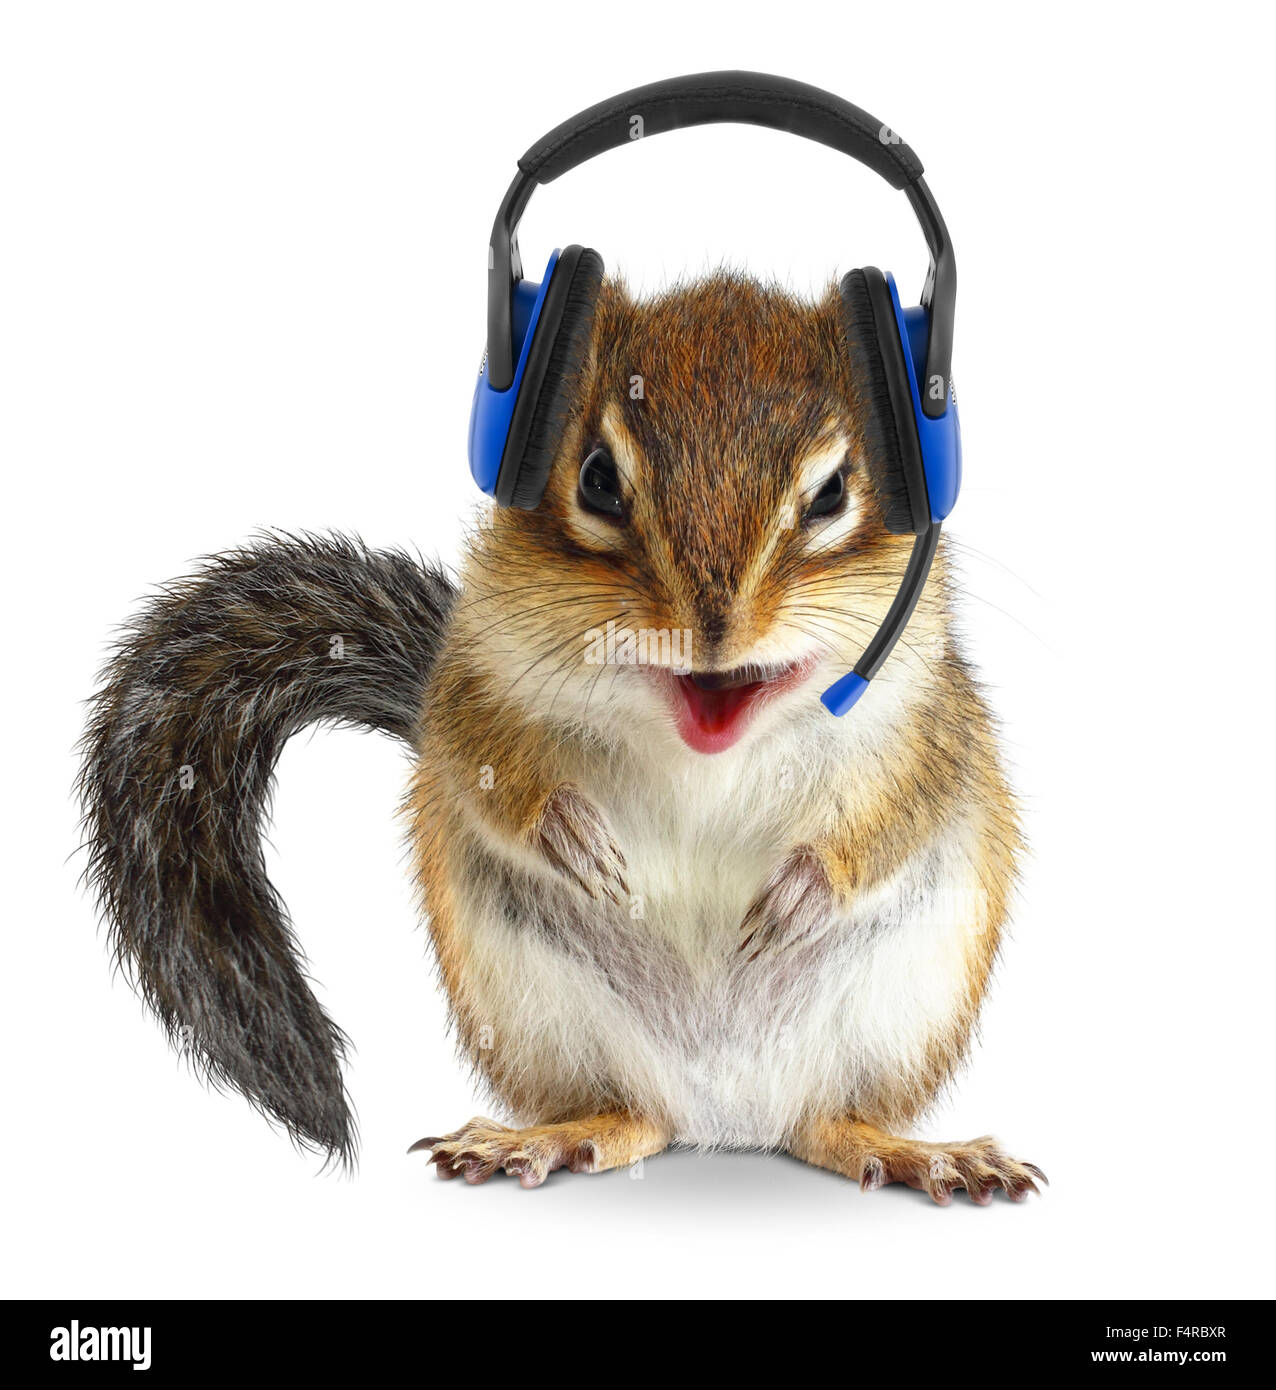 Funny animal call center operator, chipmunk with phone headset on white Stock Photo